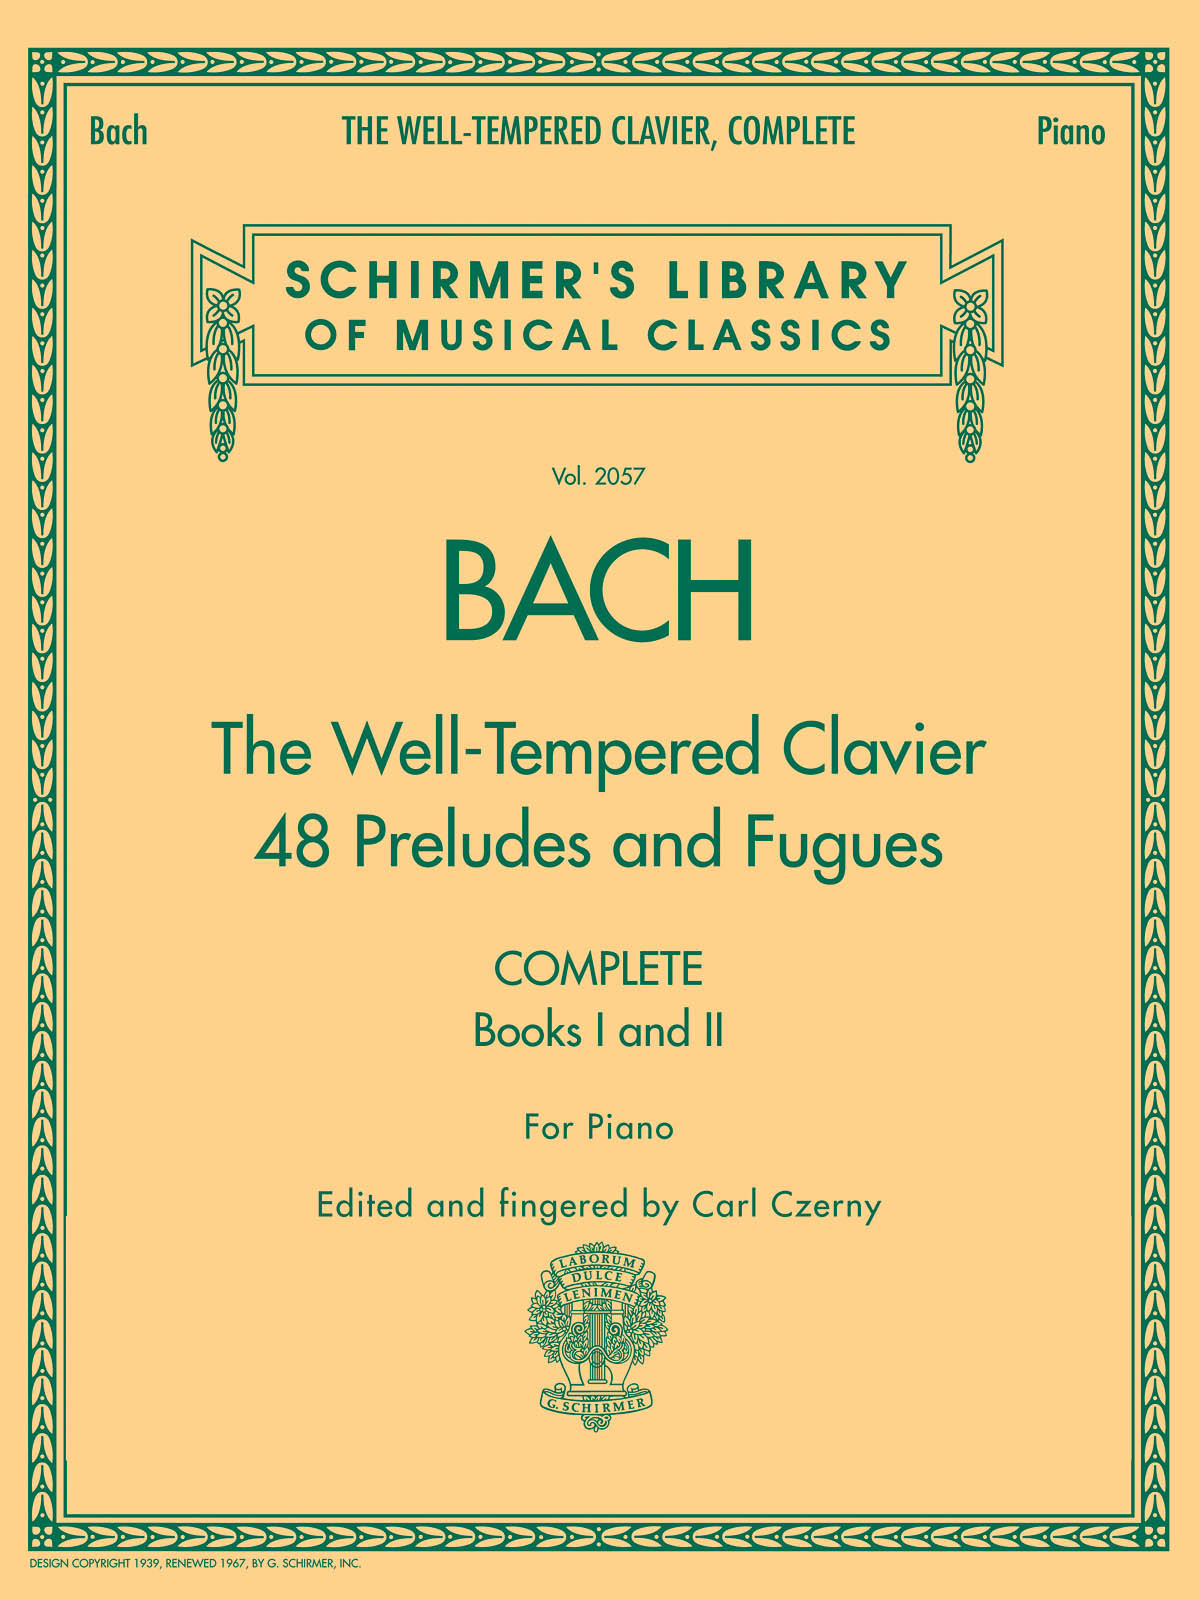 Bach: The Well-Tempered Clavier Complete